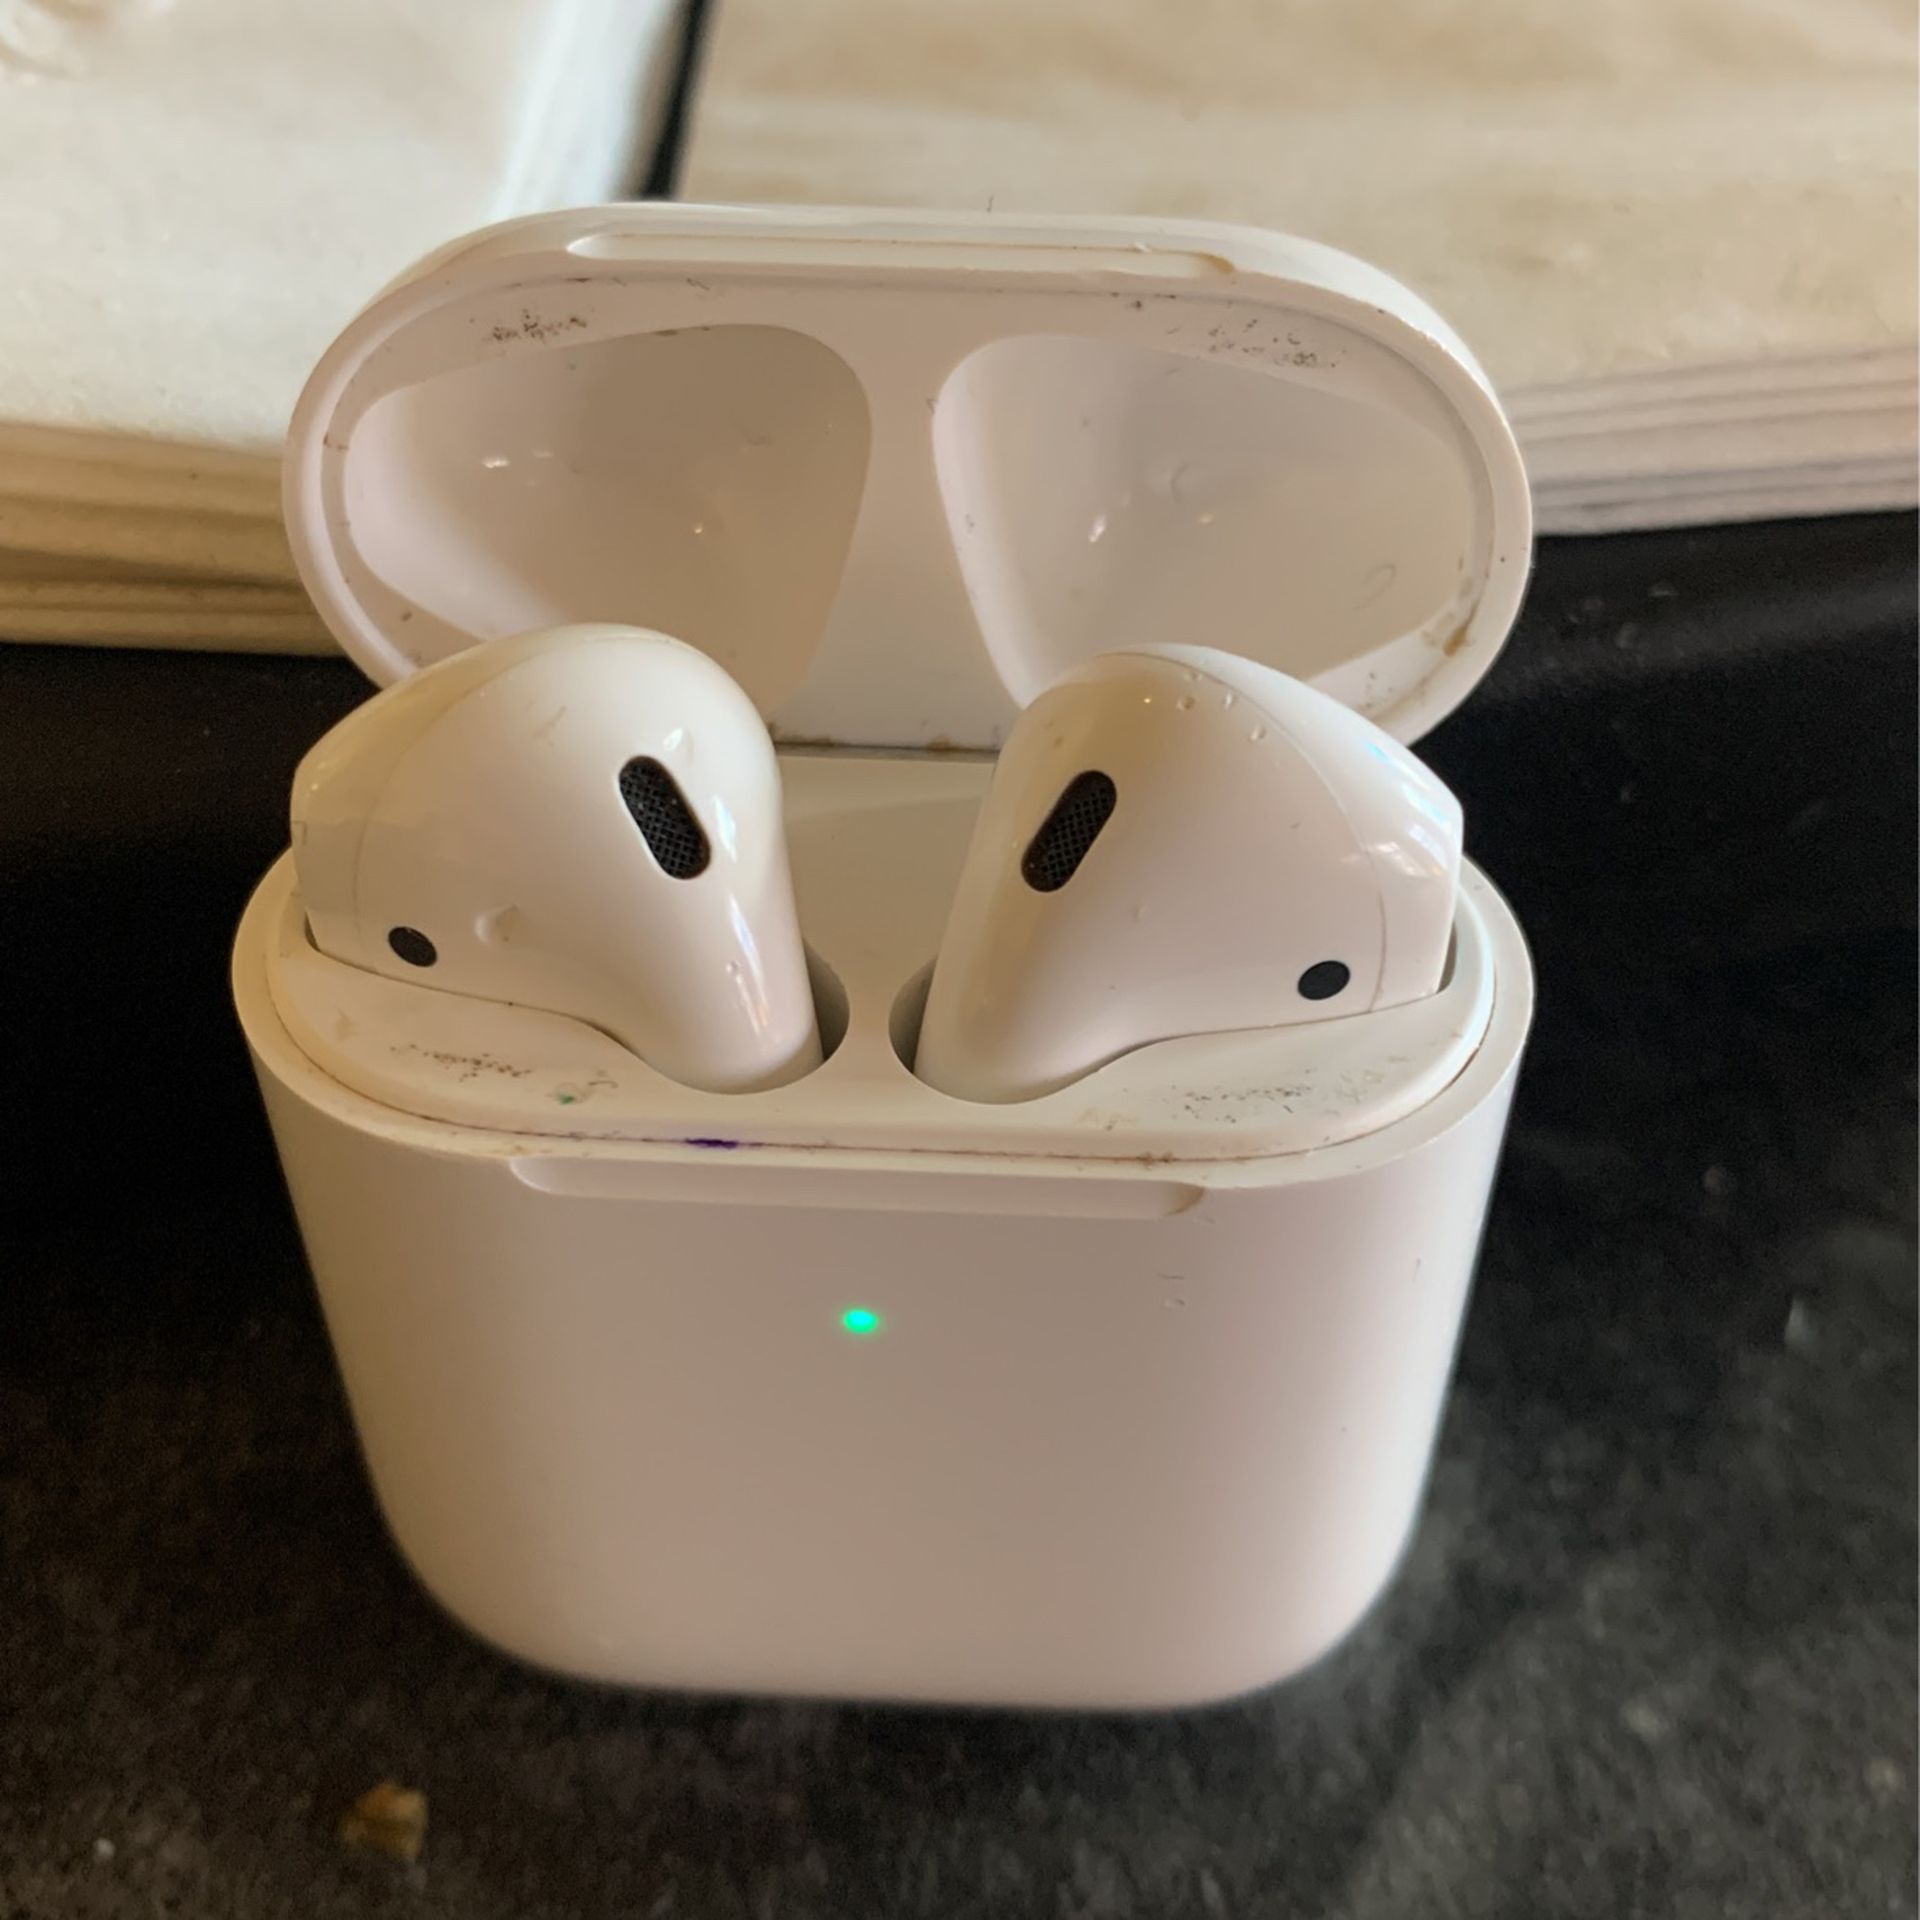 Series 2 Apple Airpods w/wireless charging 